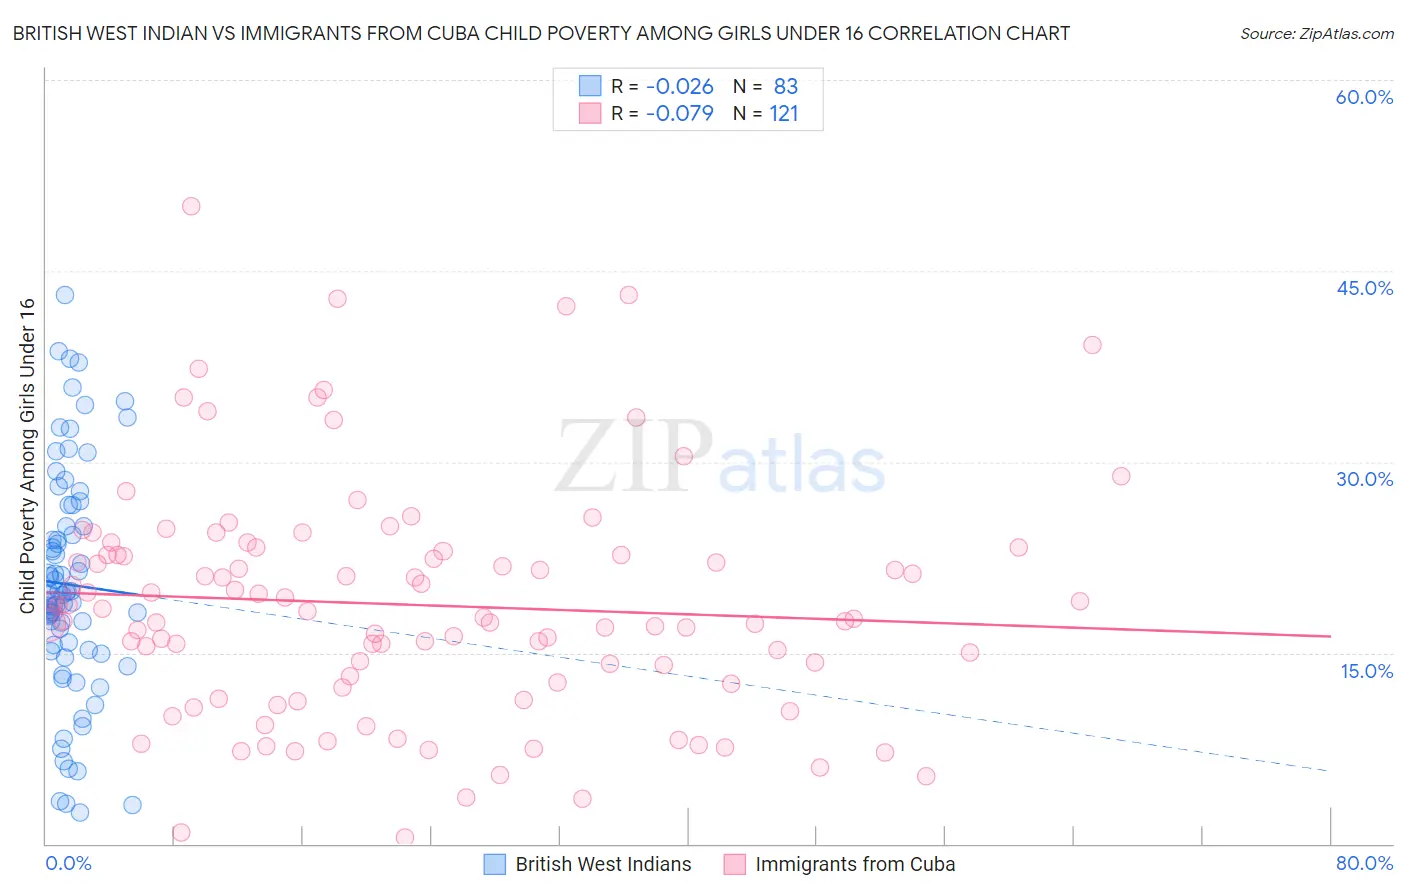 British West Indian vs Immigrants from Cuba Child Poverty Among Girls Under 16